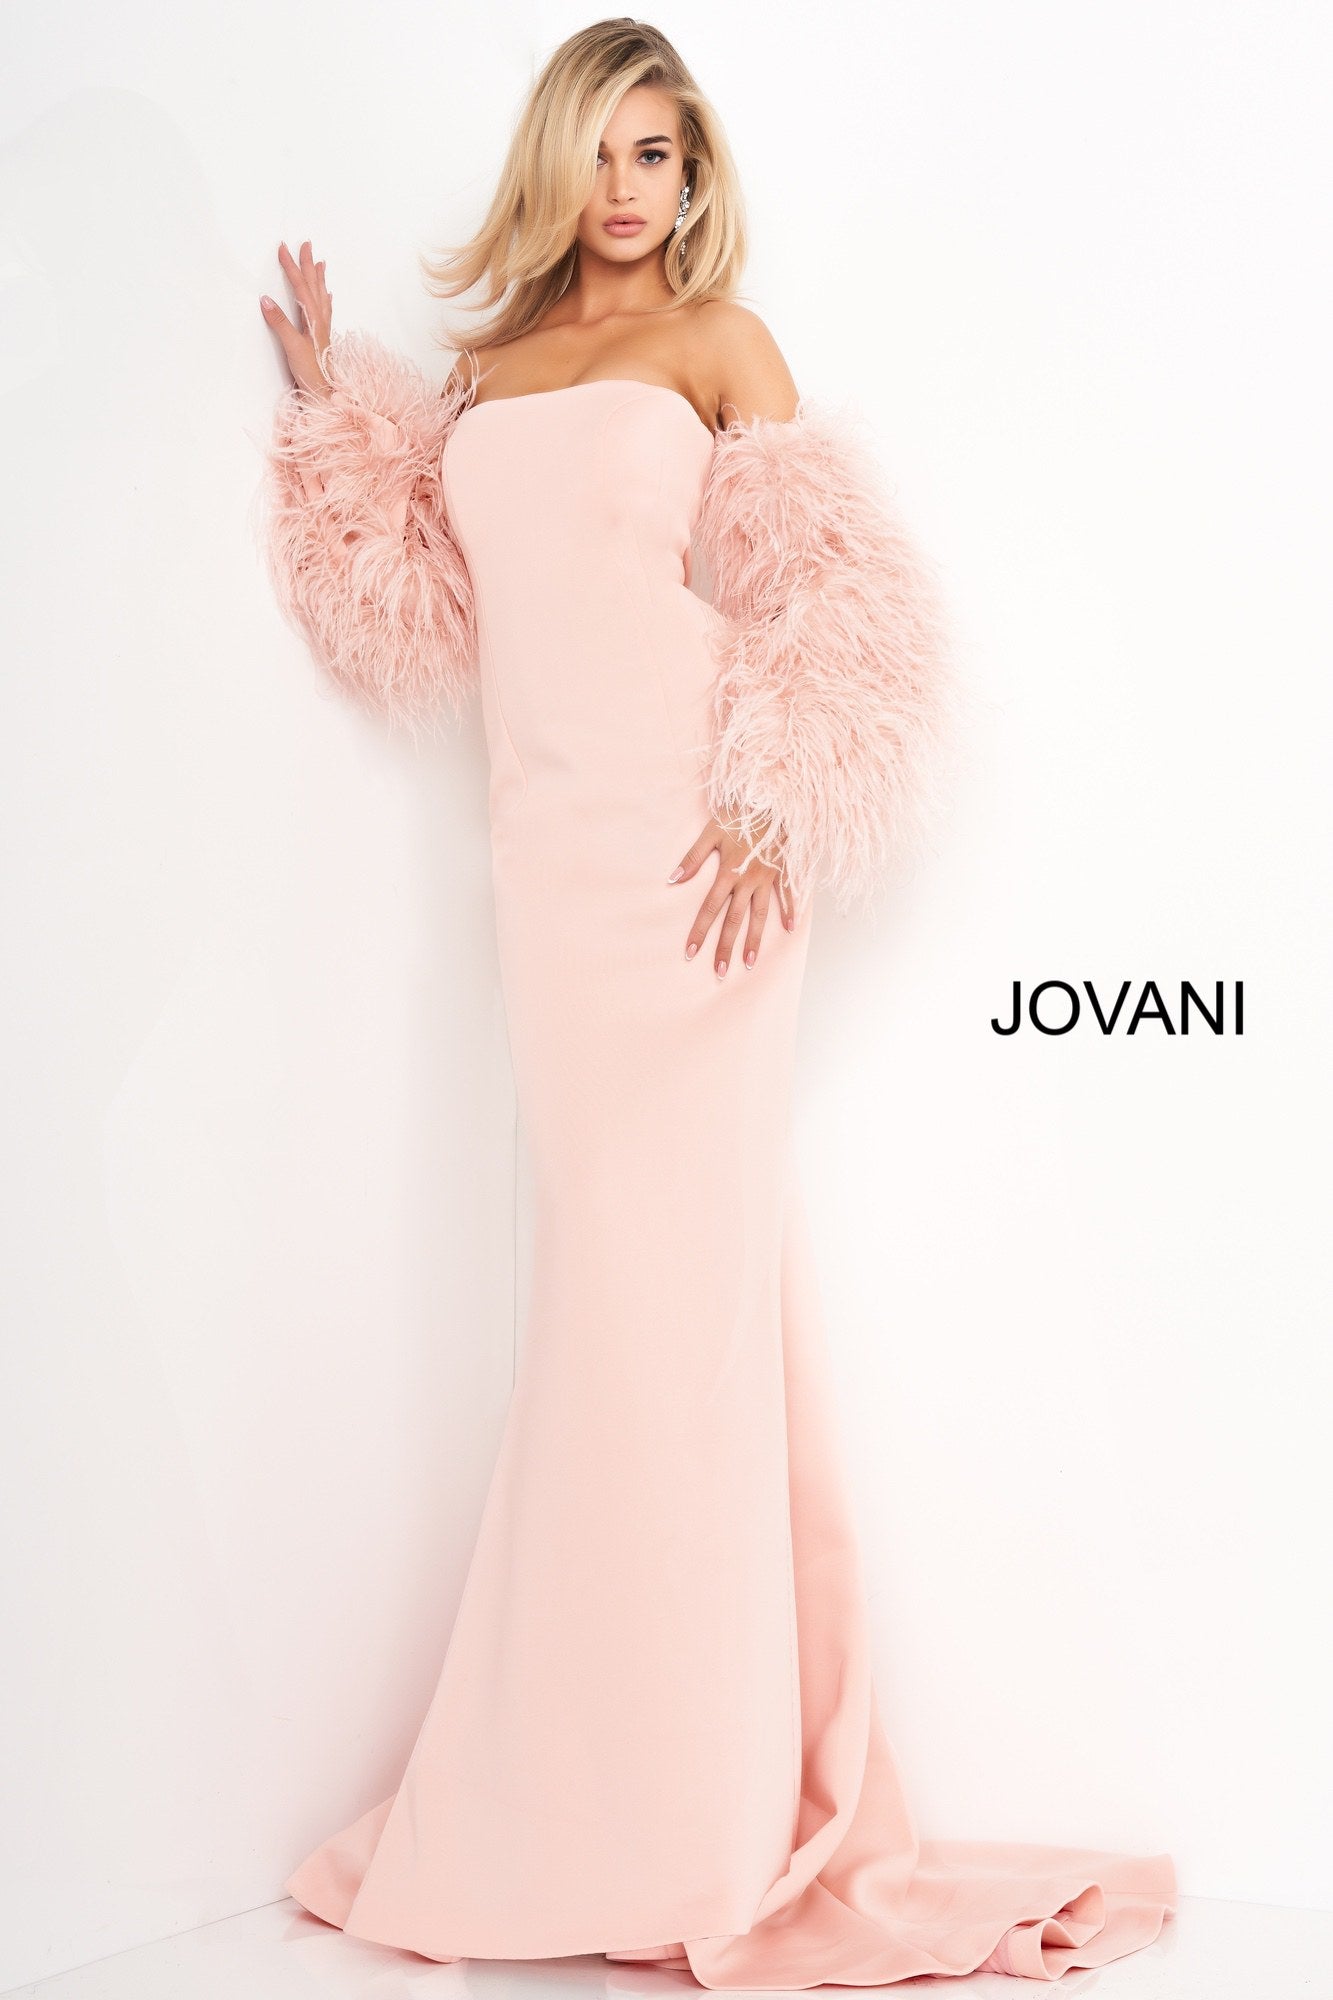 Jovani 1226 is a Long Fitted Mermaid Scuba Formal Evening Gown. This Straight neckline with Long Off the Shoulder Feather Sleeves. This Fit & Flare Wedding Dress Features a Lush Sweeping train. Great Red Carpet or formal event gown. Great for a wedding guest dress or mother of the bride gown. Stretch scuba fabric, form fitting silhouette, floor length with train, strapless bodice, straight neckline, ostrich feather sleeves. Available Sizes: 00-24  Available Colors: black, blush, white, white/black